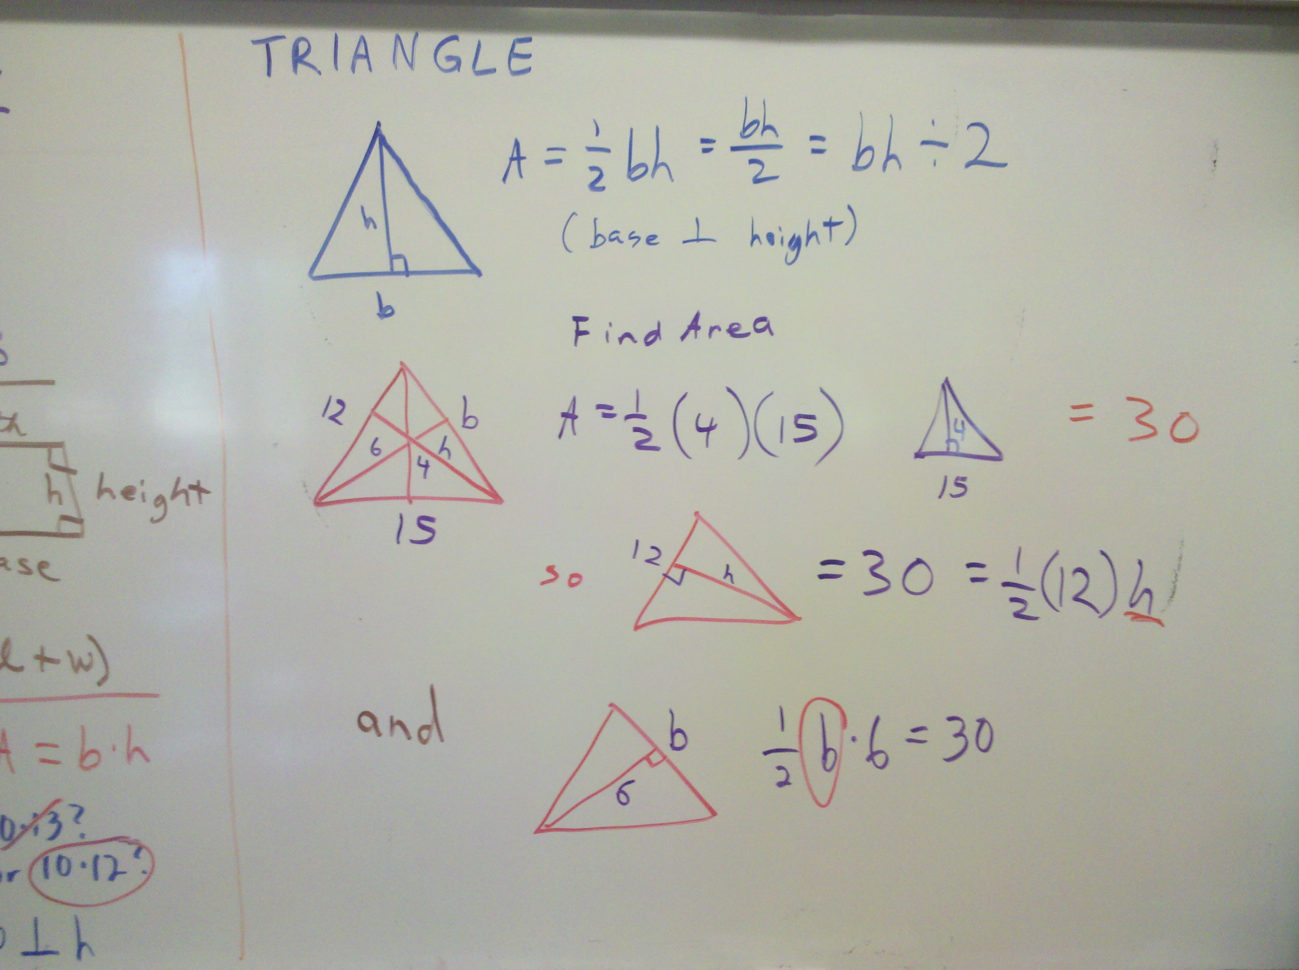 triangle-angle-sum-worksheet-answer-key-db-excel